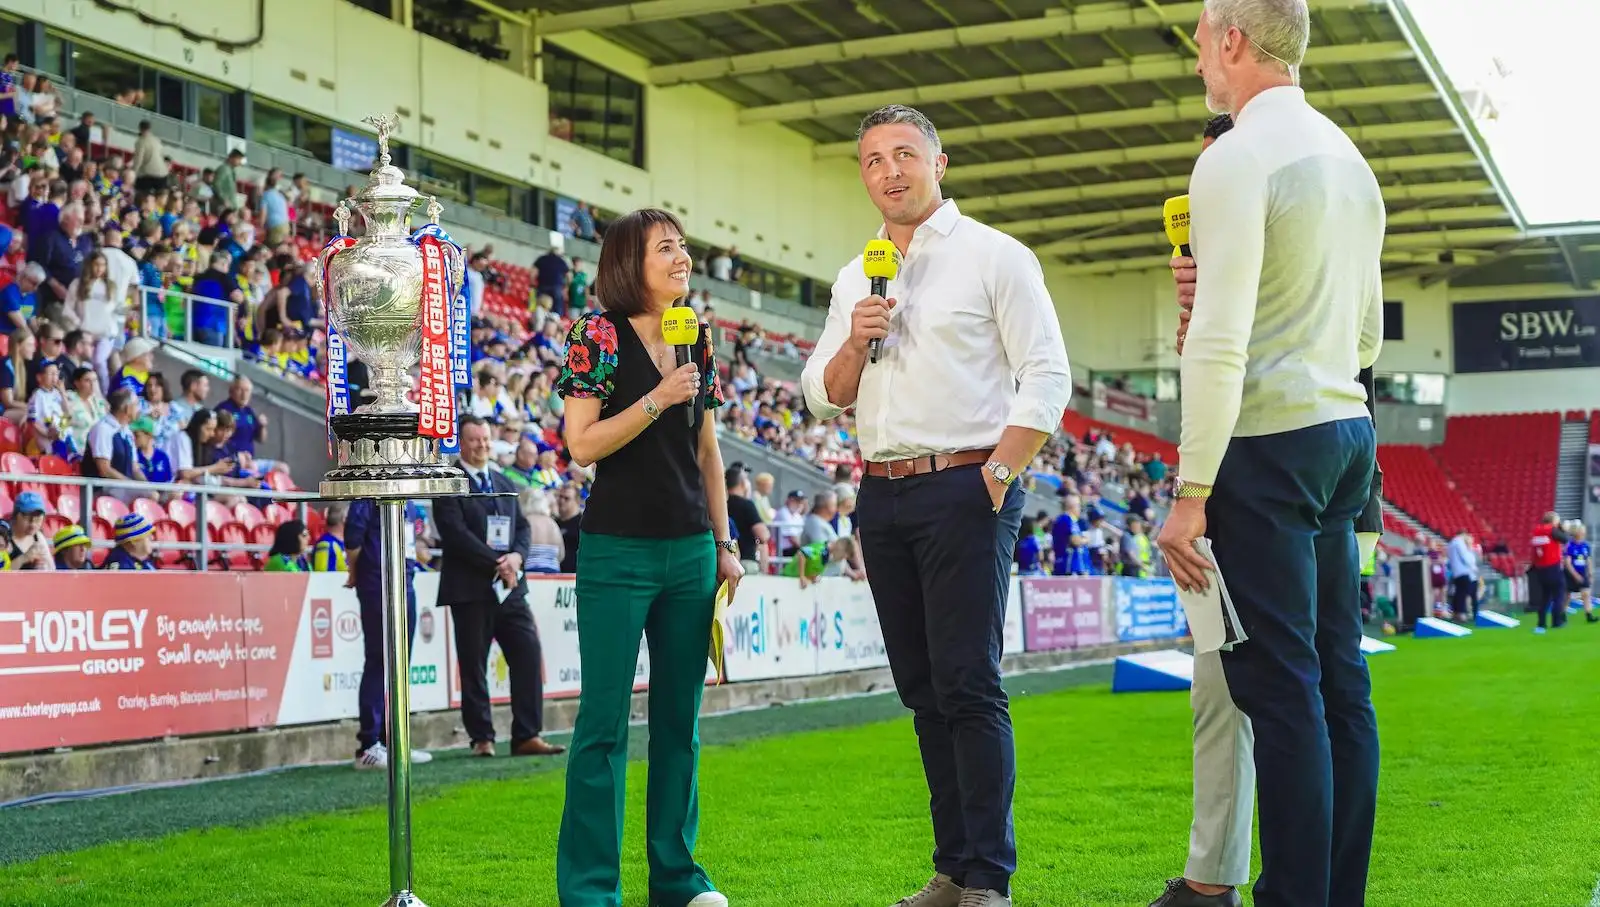 Challenge Cup semi-finals draw contrasting BBC audience figures